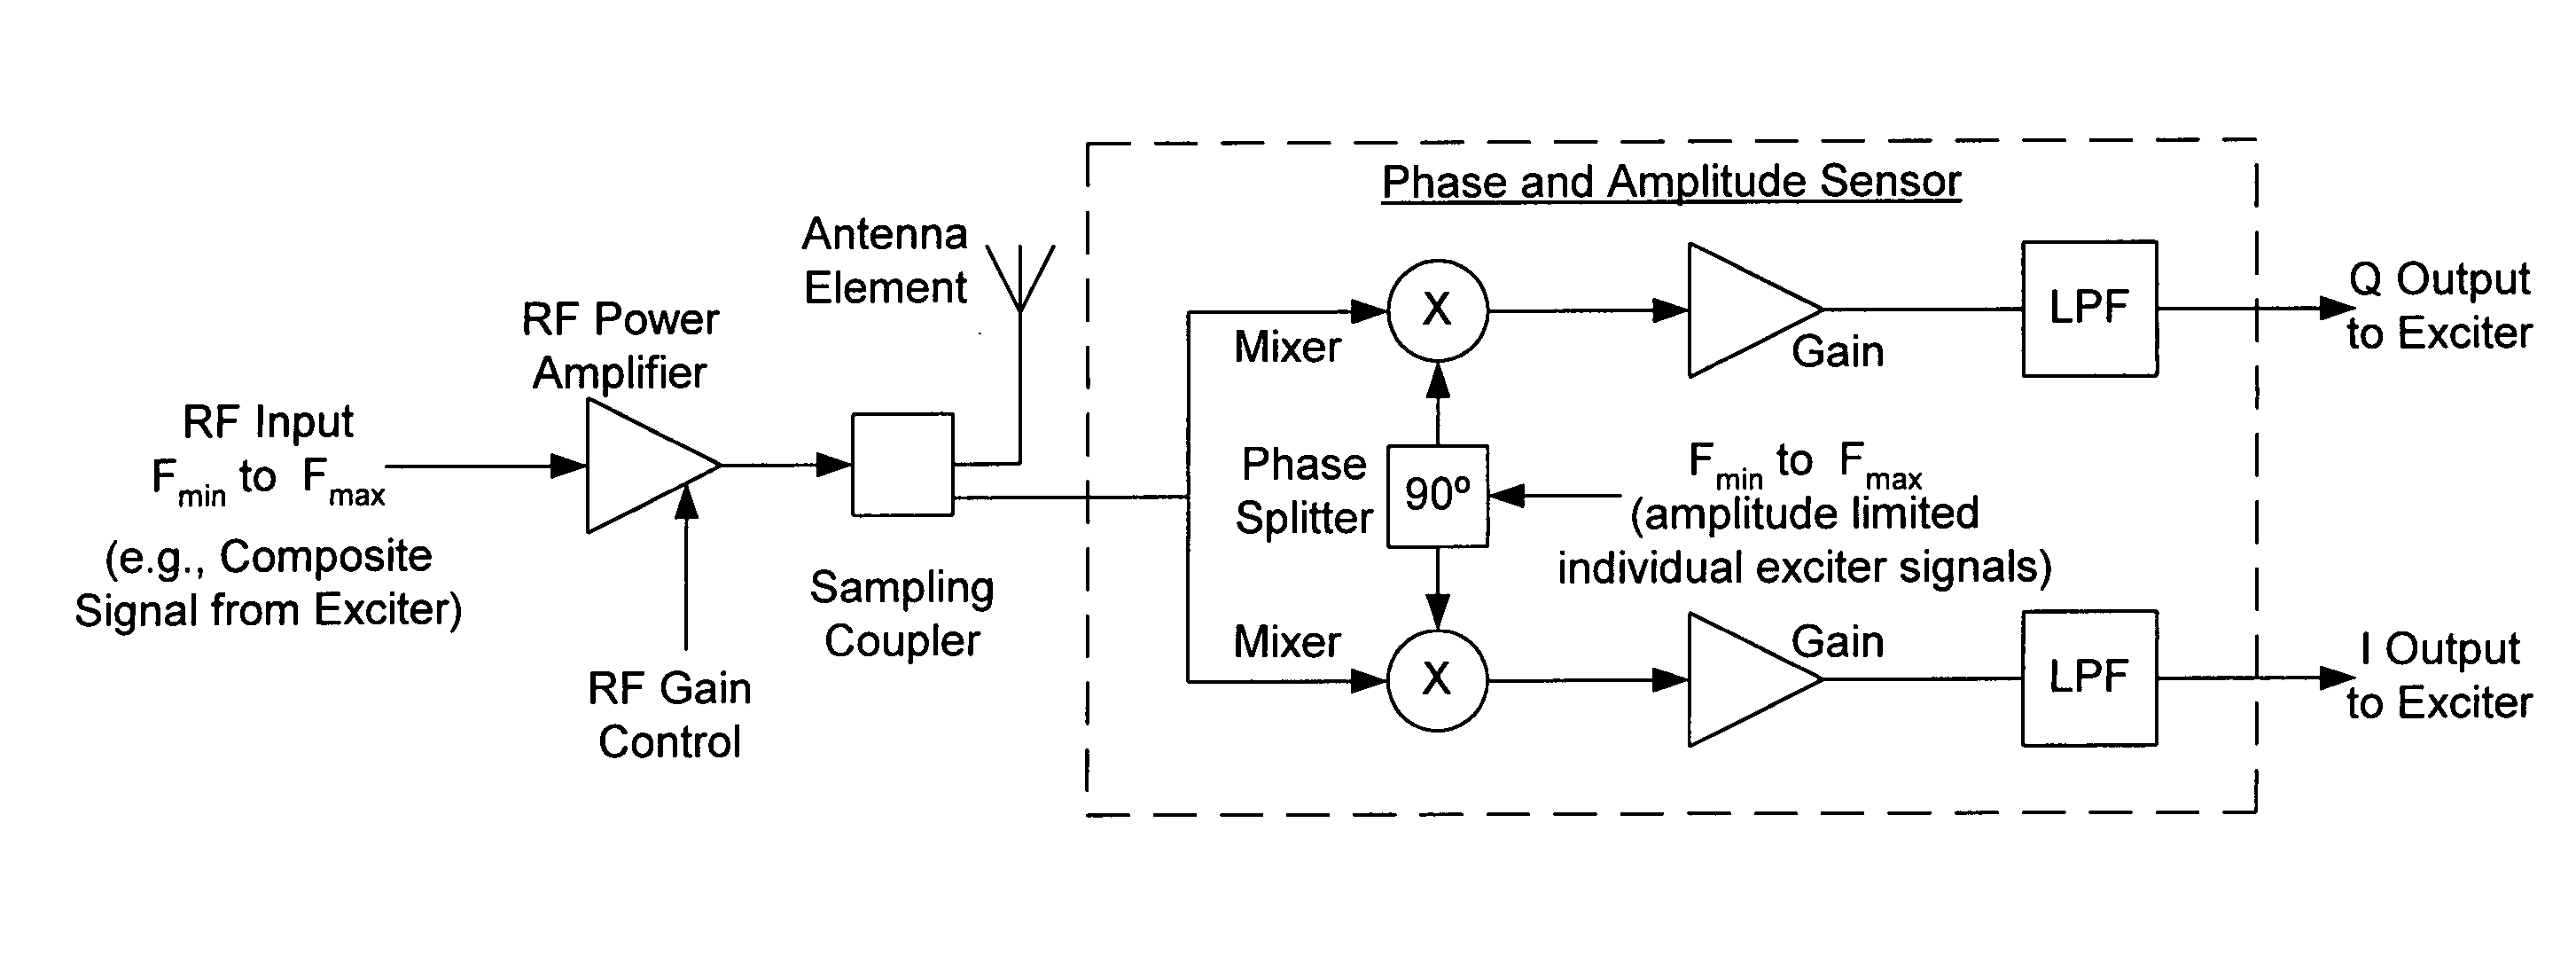 Frequency selective leveling loop for multi-signal phased array transmitters